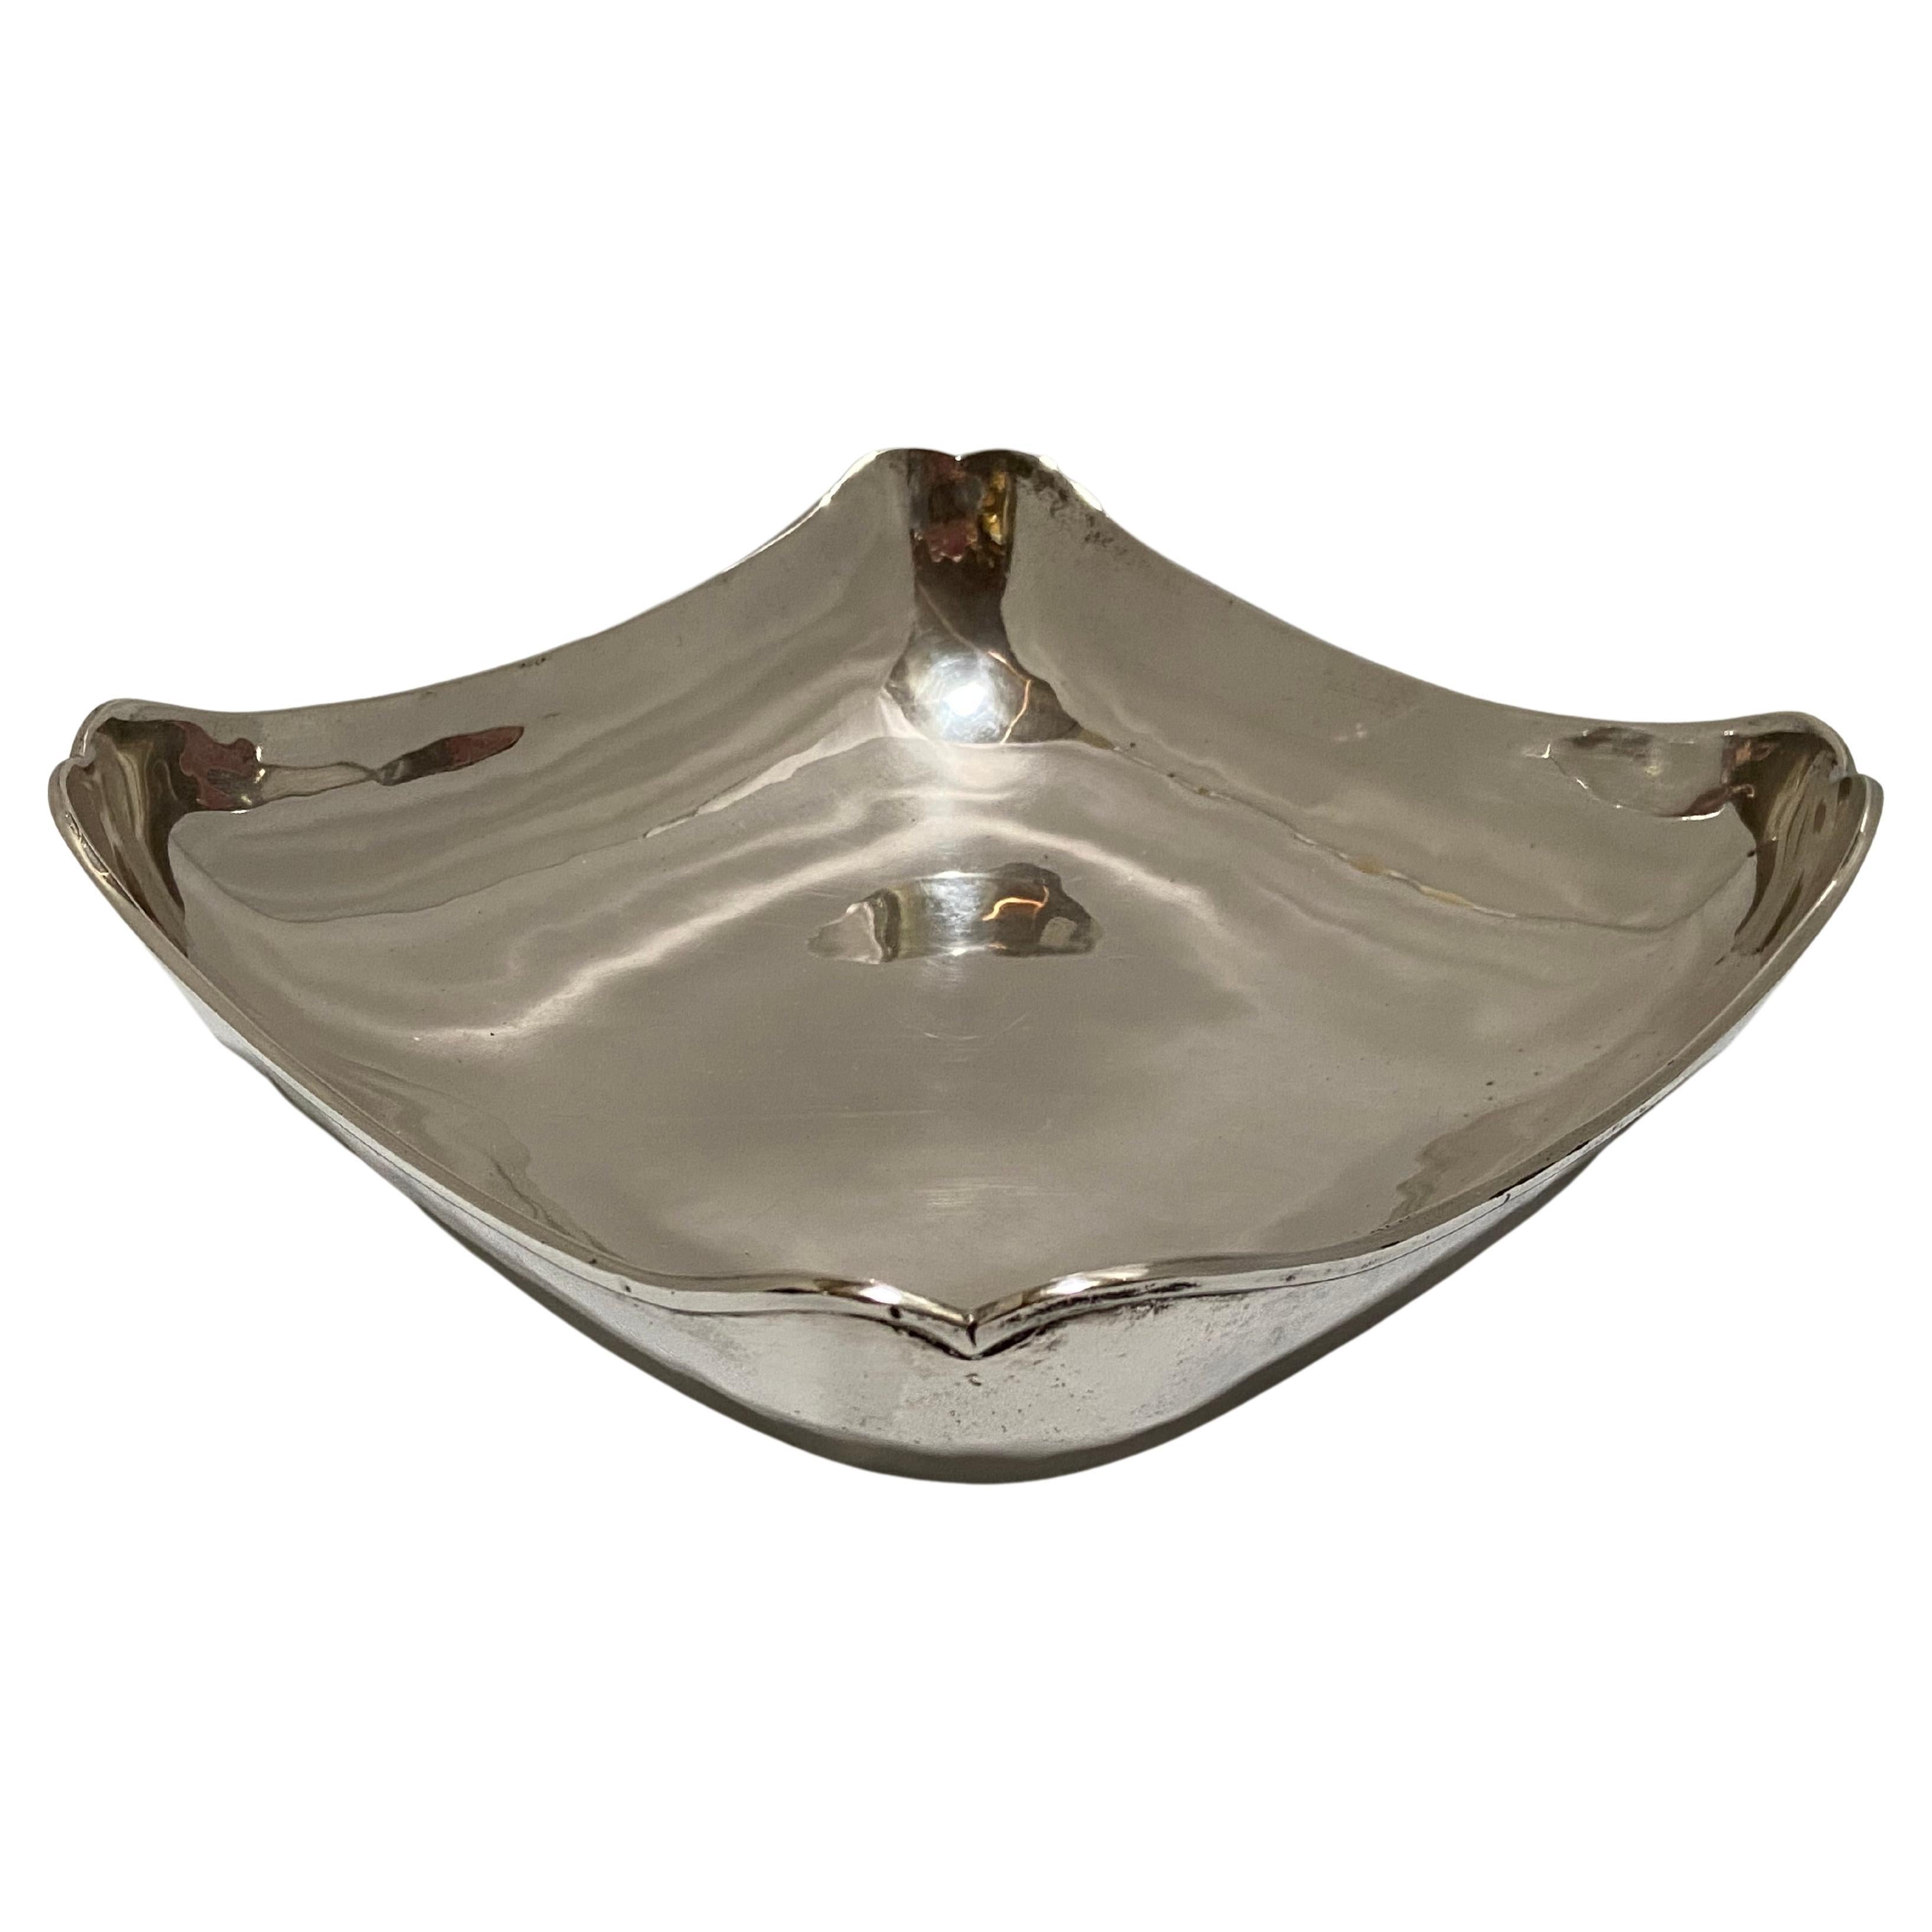 Vintage Mexican Mid-Century Modern Sterling Silver Scalloped Bowl by C. Zurita For Sale